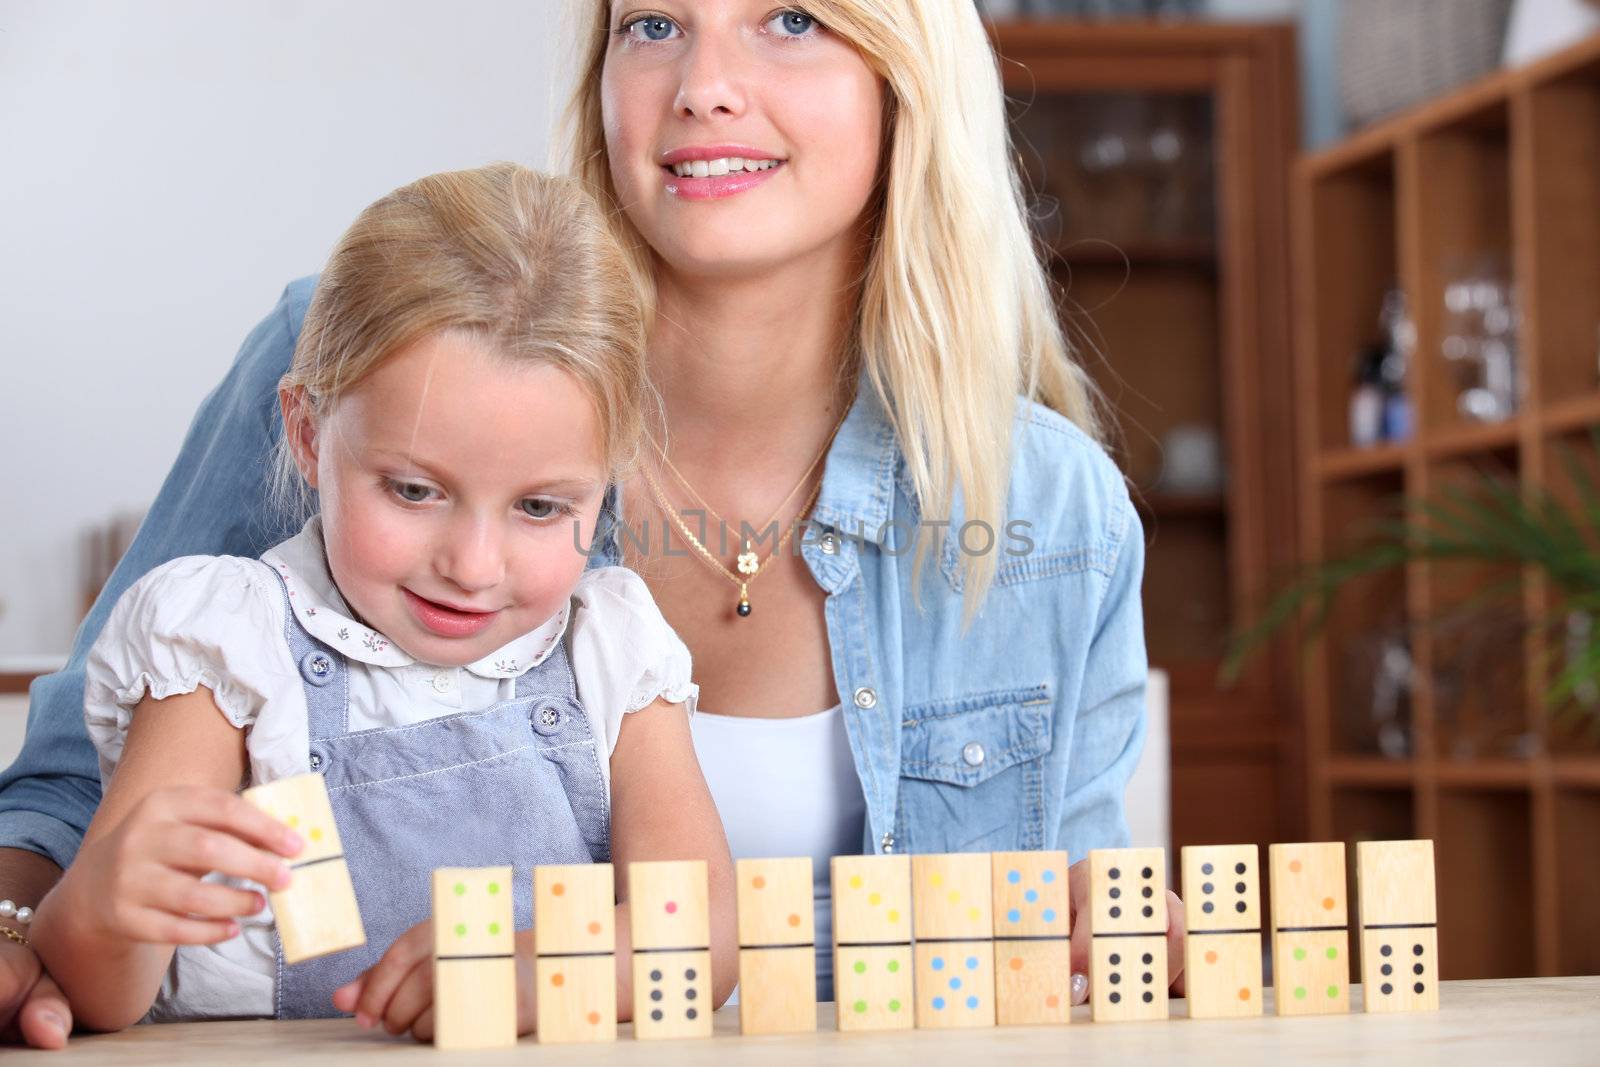 A mother and daughter playing with dominos.